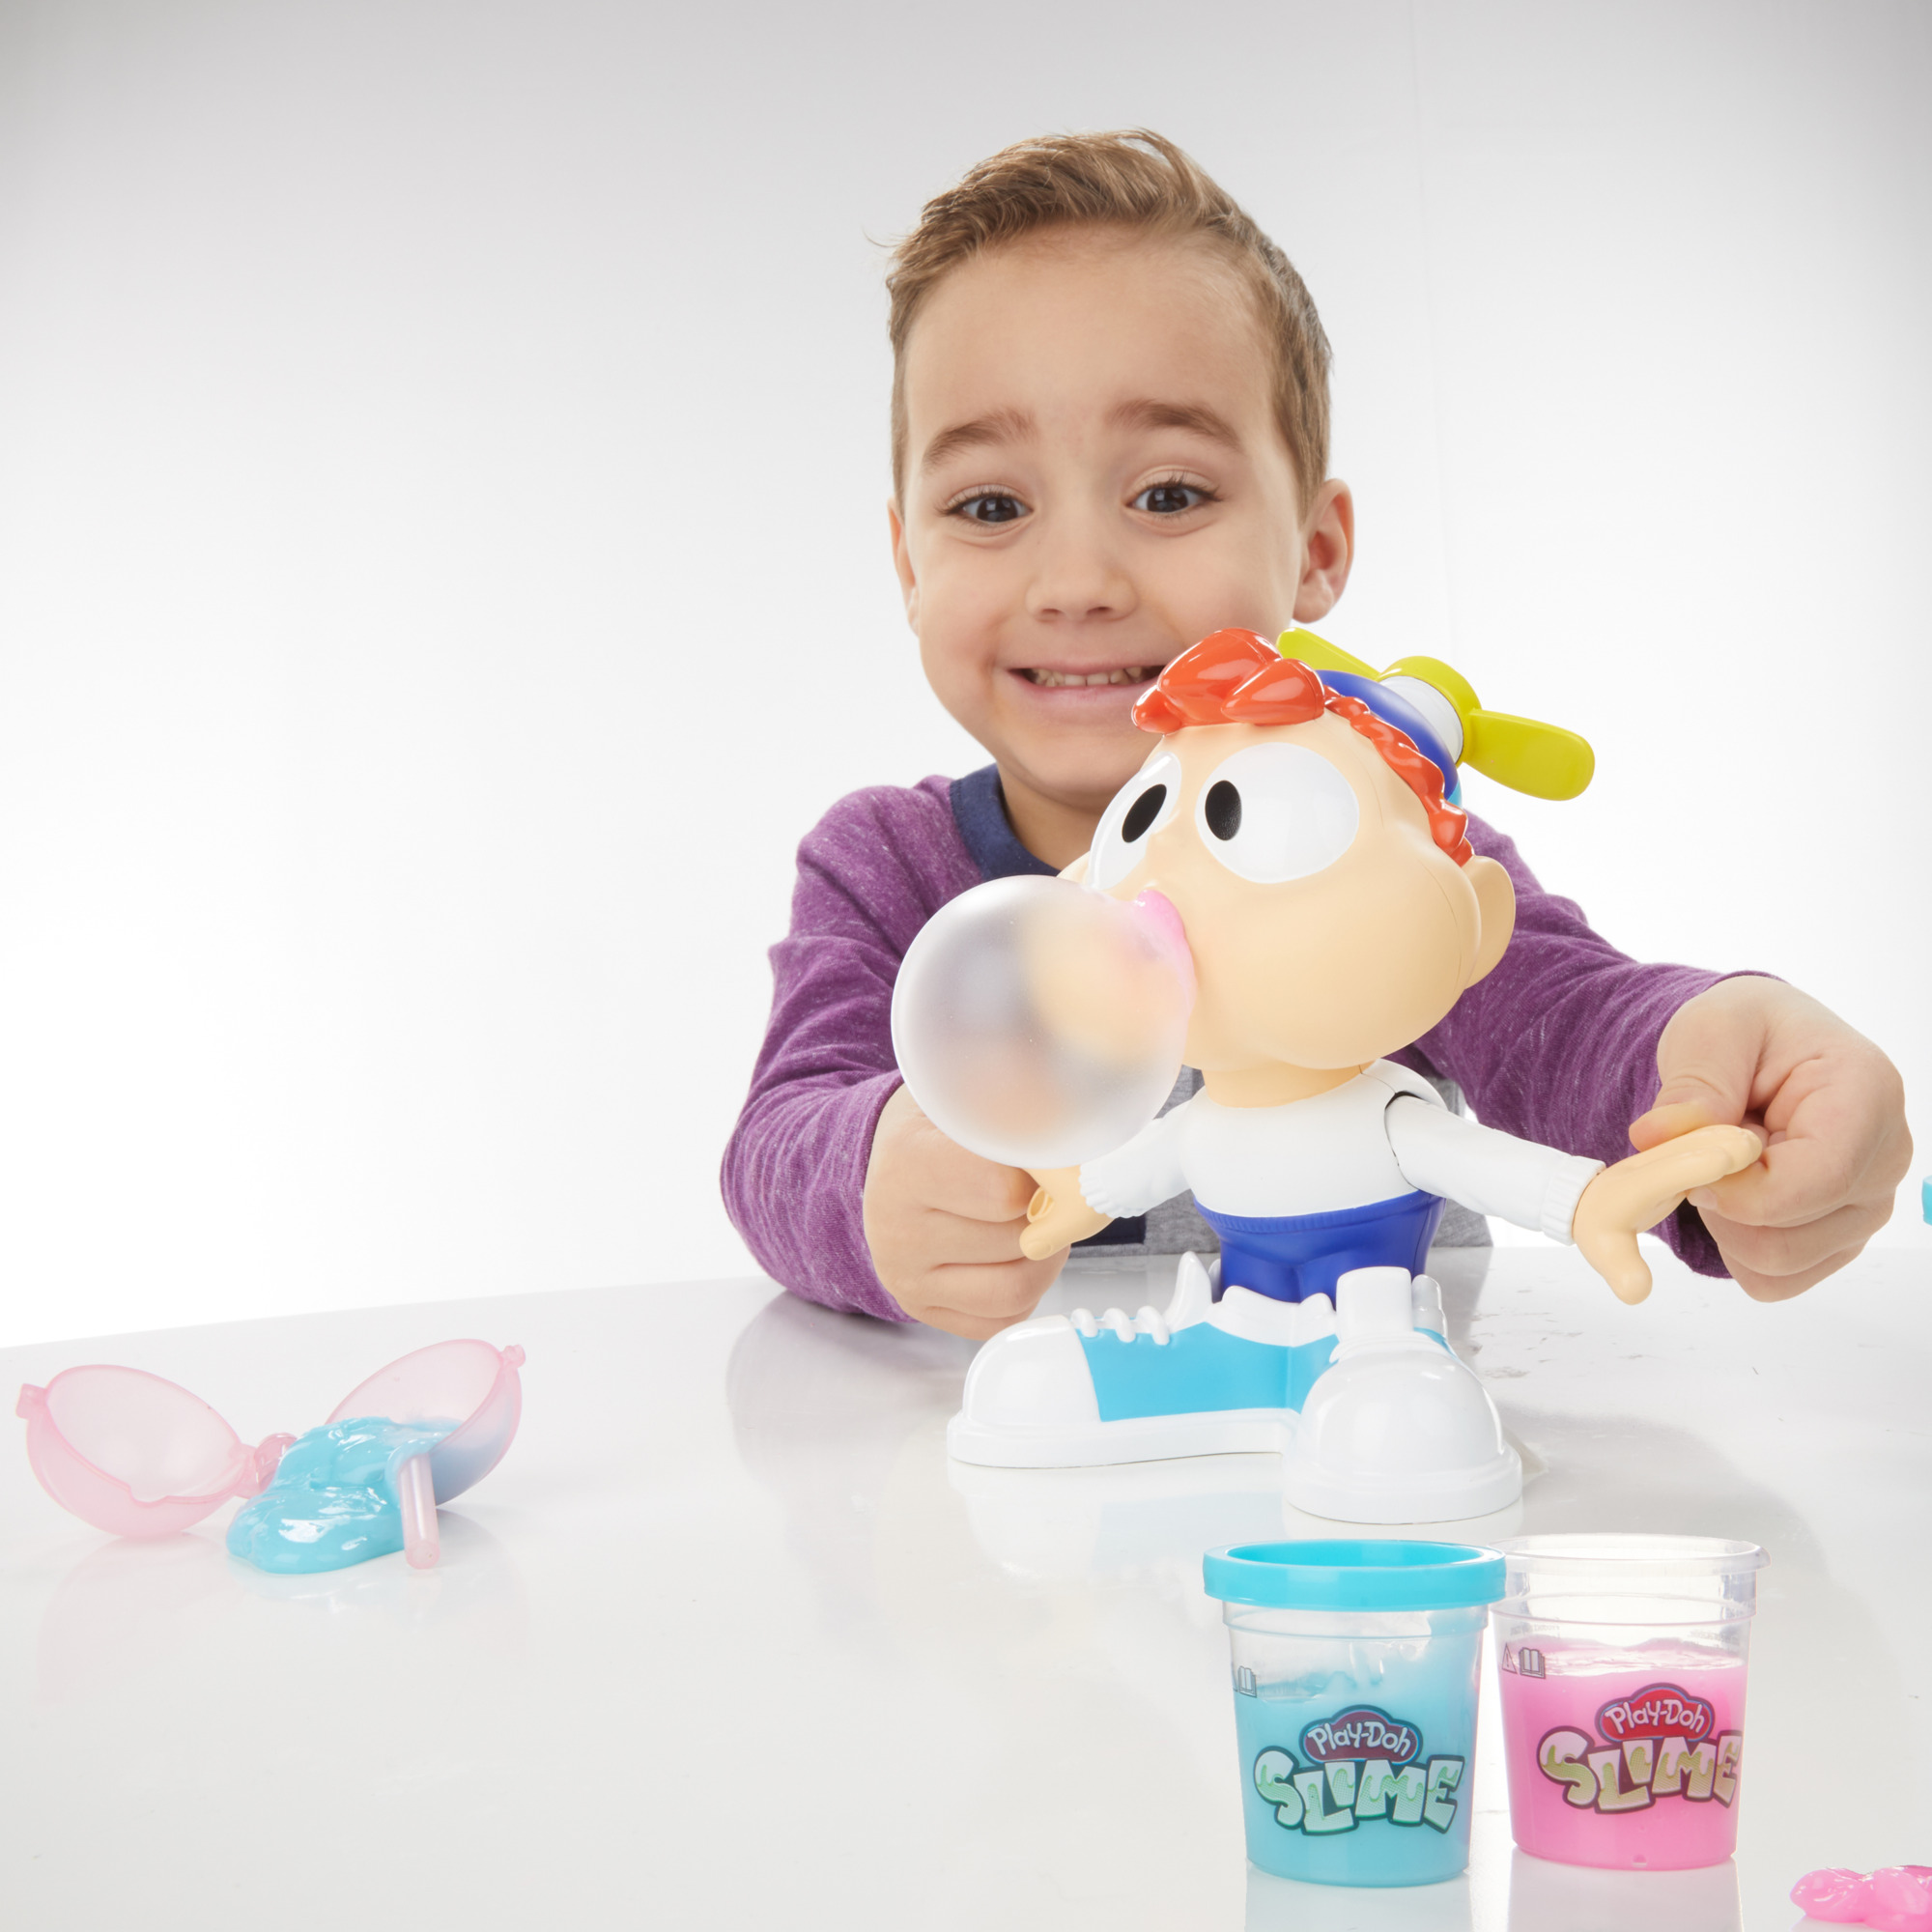 Play-Doh Slime Chewin' Charlie Slime Bubble Maker Toy - image 5 of 6